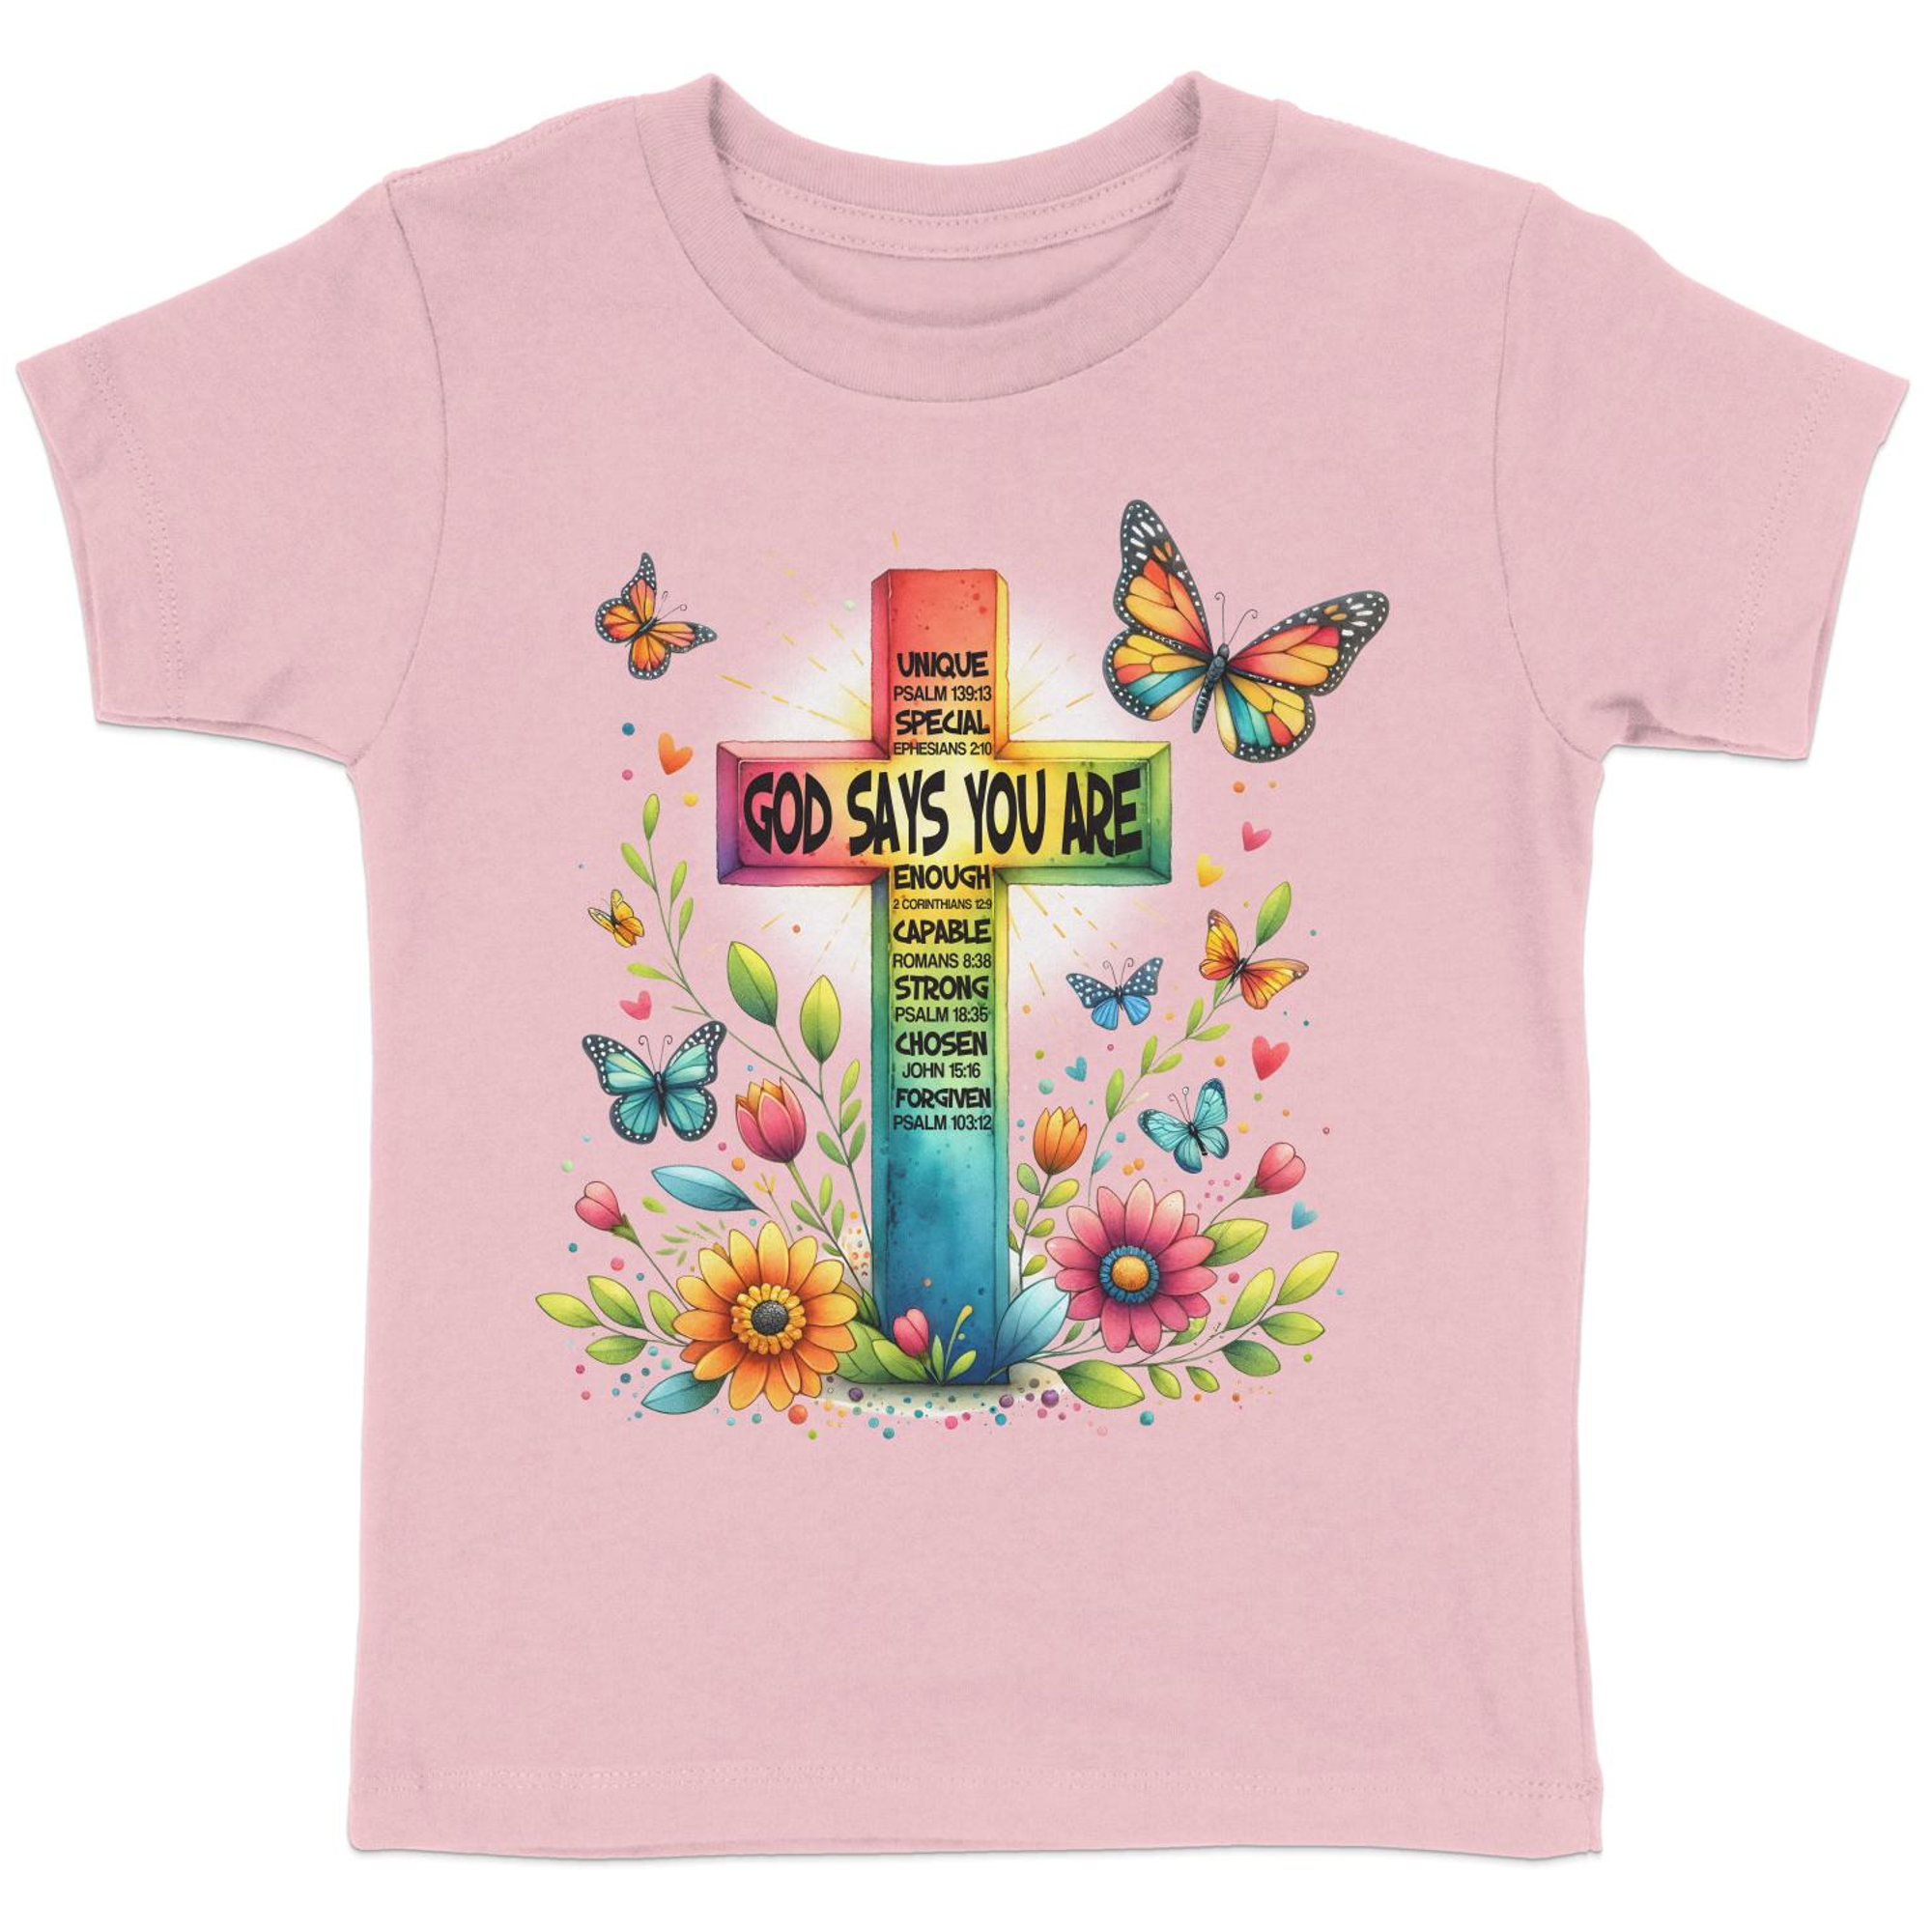 God Says You Are Toddler Short Sleeve Tee Size: 5/6T Color: Pink Jesus Passion Apparel